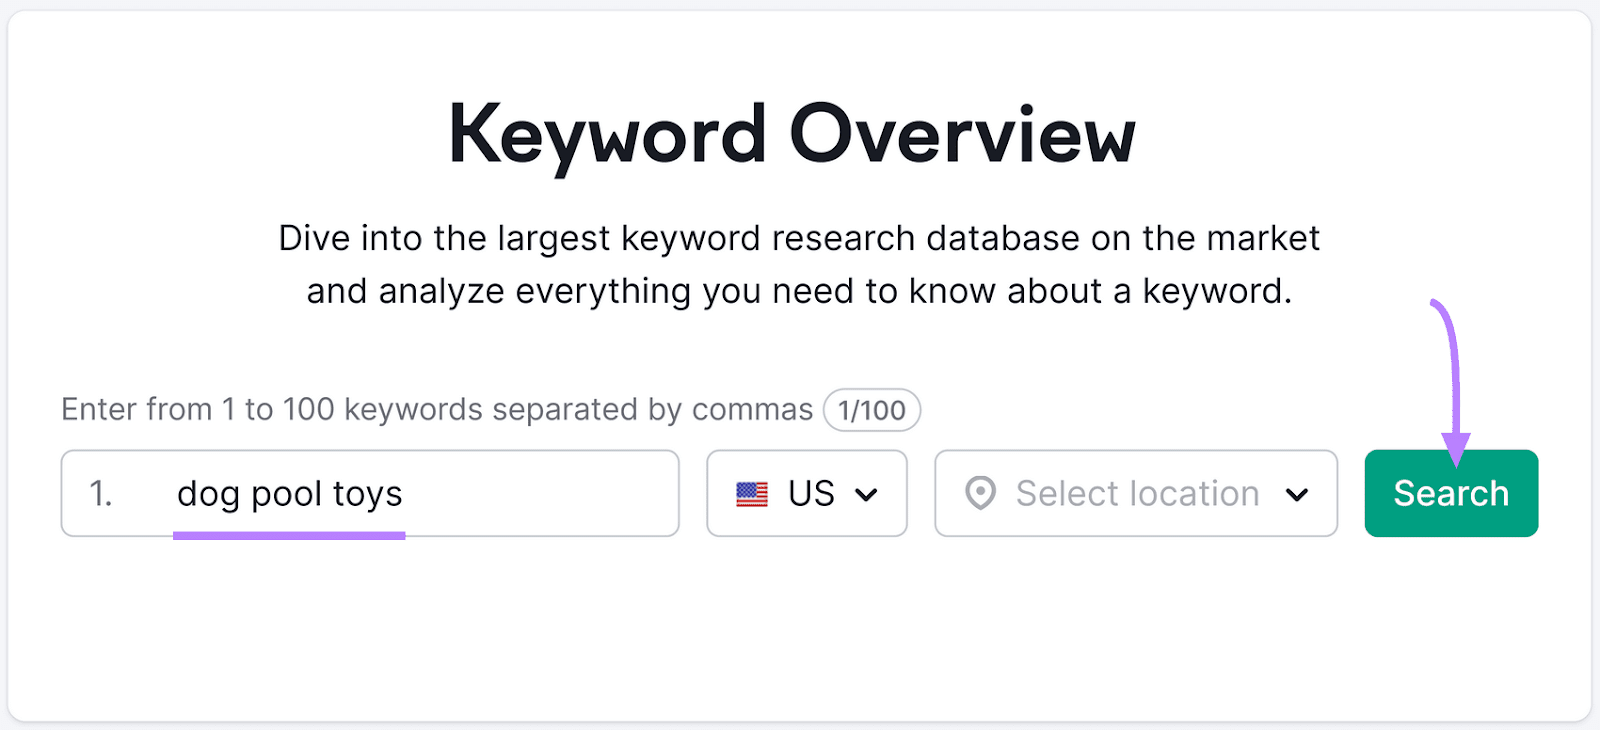 " **** toys" keyword entered into the Keyword Overview tool search bar